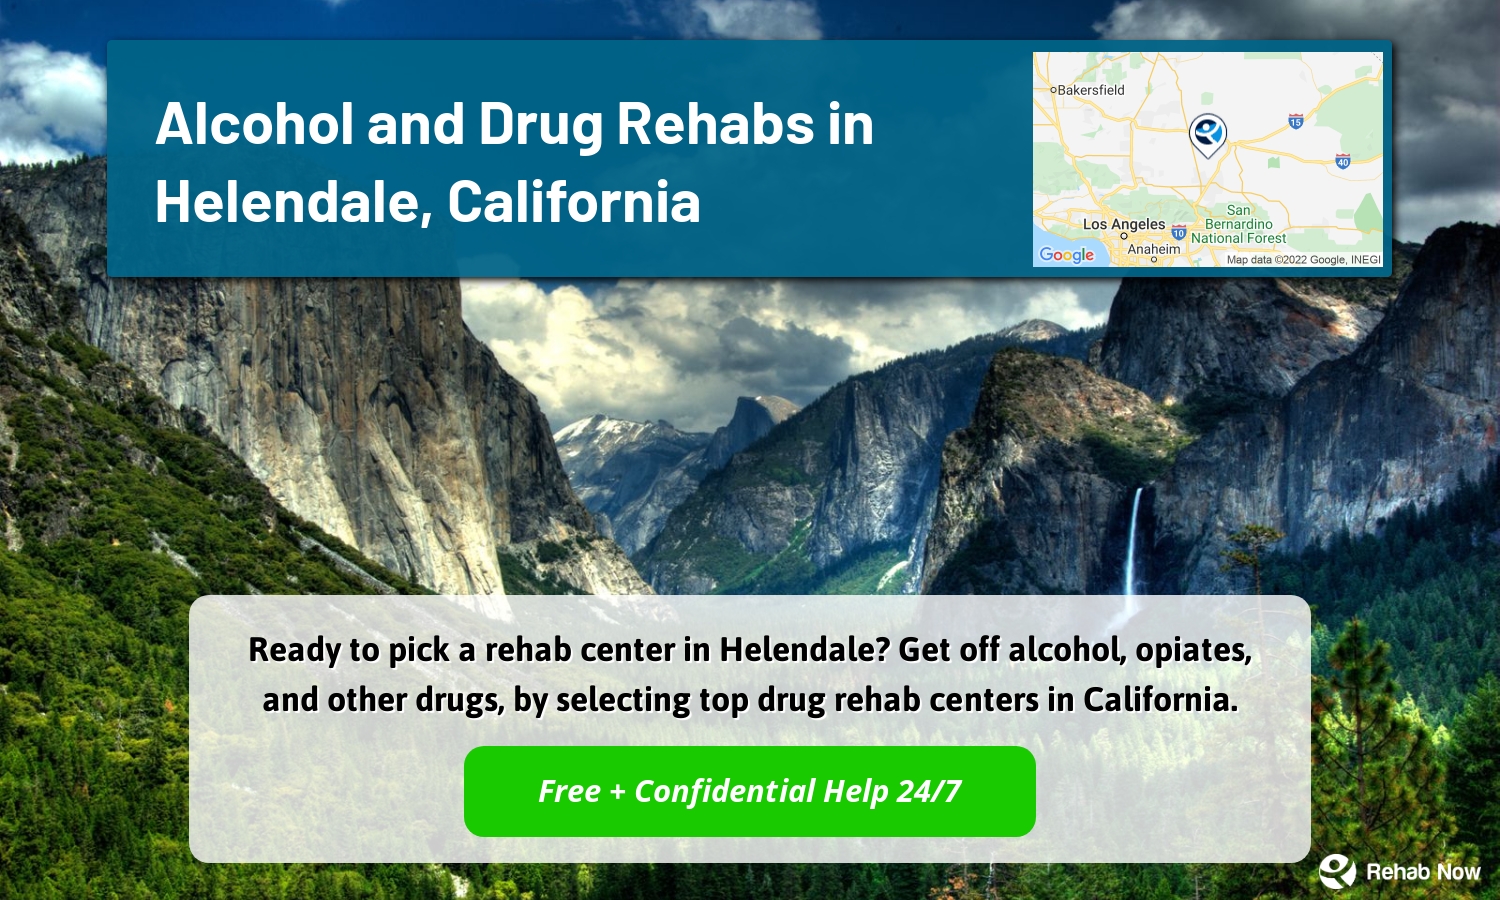 Ready to pick a rehab center in Helendale? Get off alcohol, opiates, and other drugs, by selecting top drug rehab centers in California.